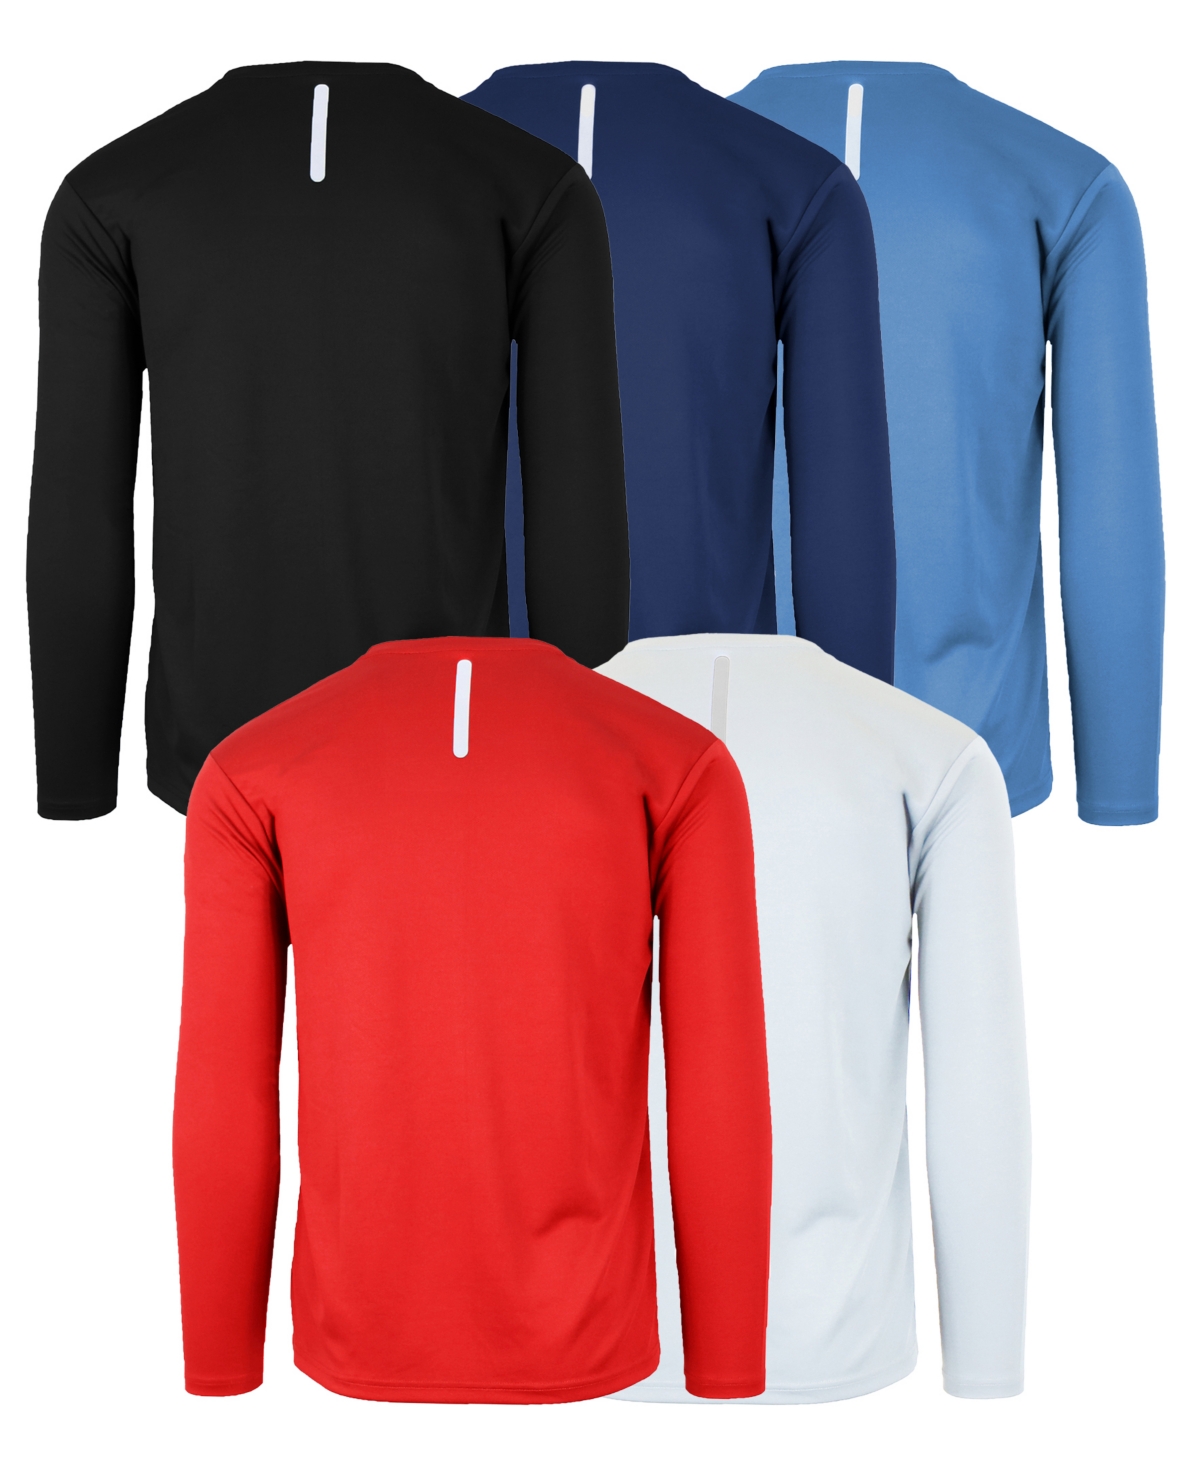 Shop Galaxy By Harvic Men's Long Sleeve Moisture-wicking Performance Crew Neck Tee -5 Pack In Black Multi